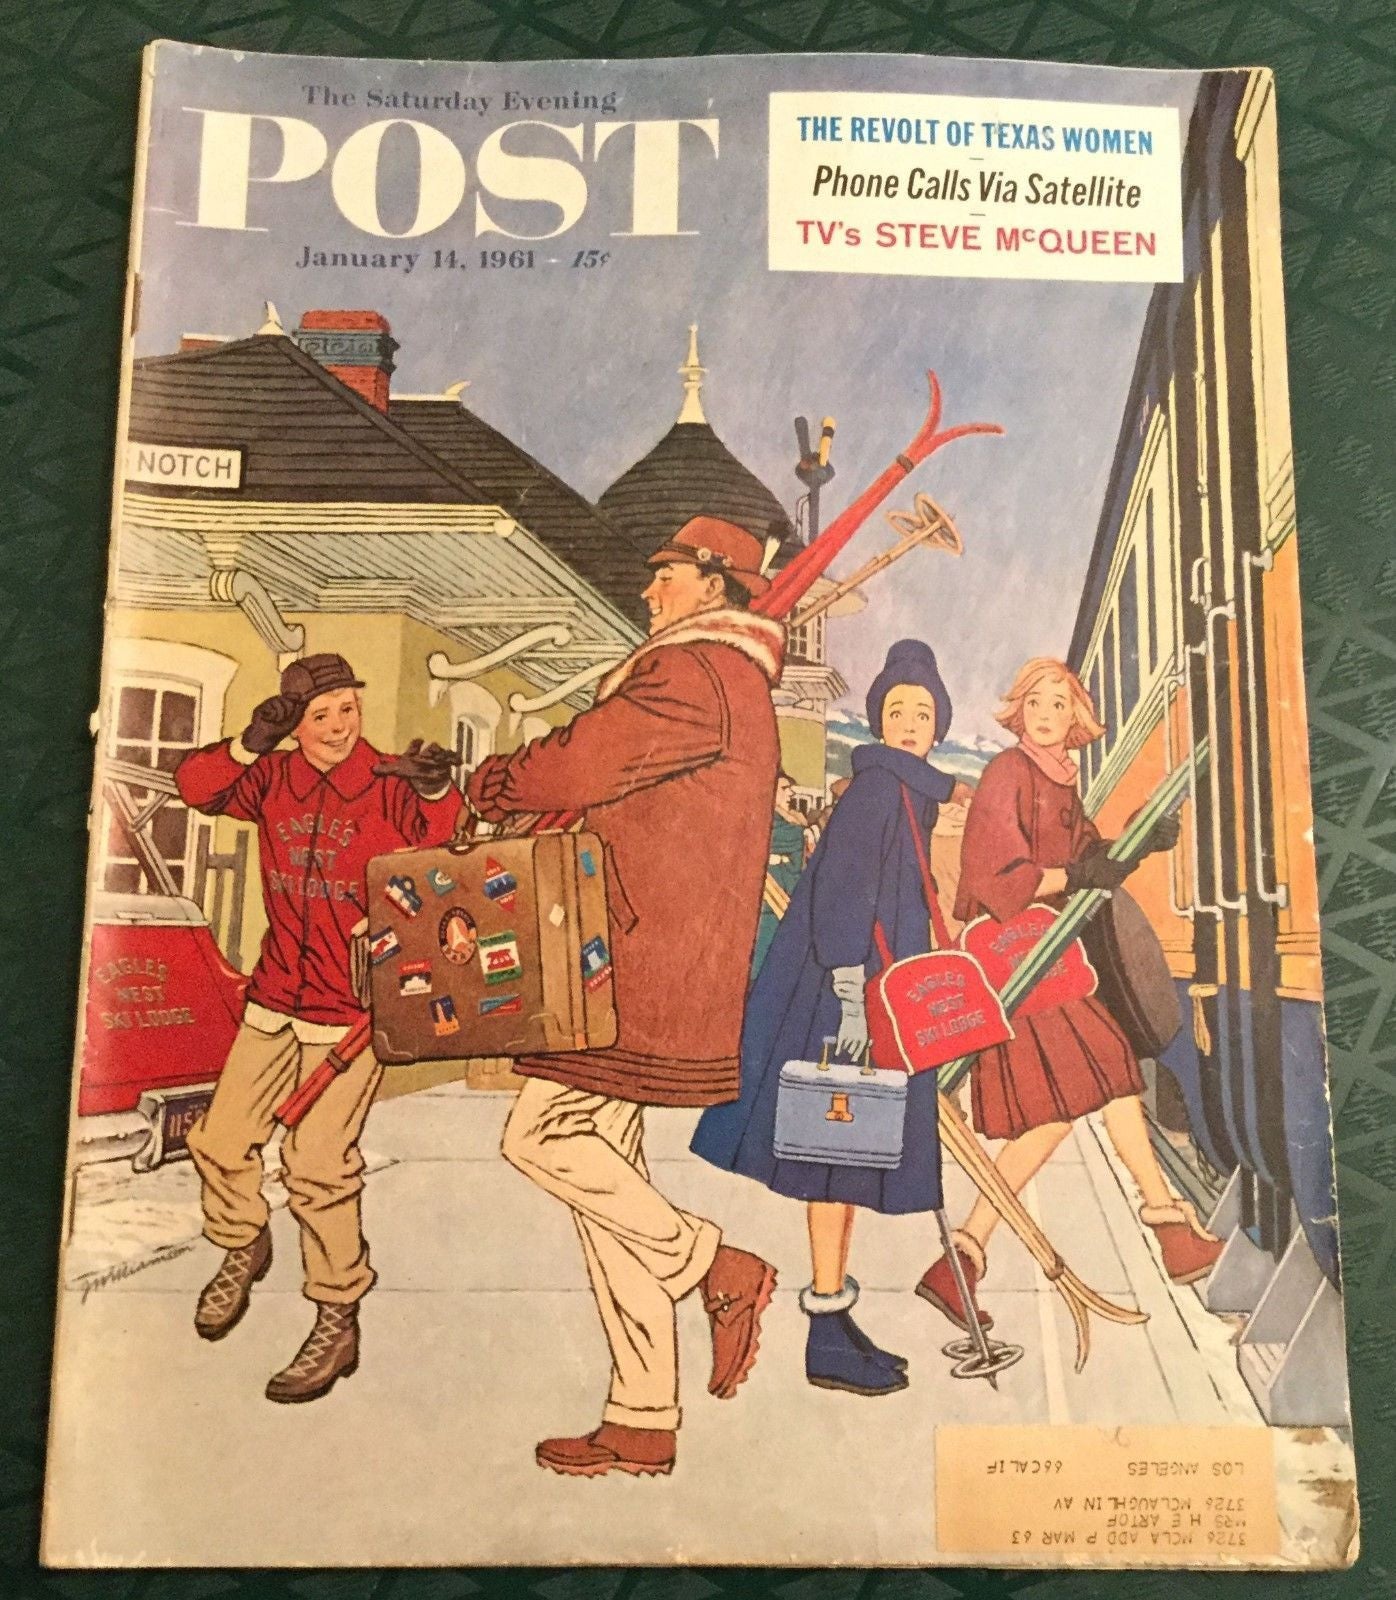 The Saturday Evening Post (January 14, 1961 Issue) - Vintage Magazine